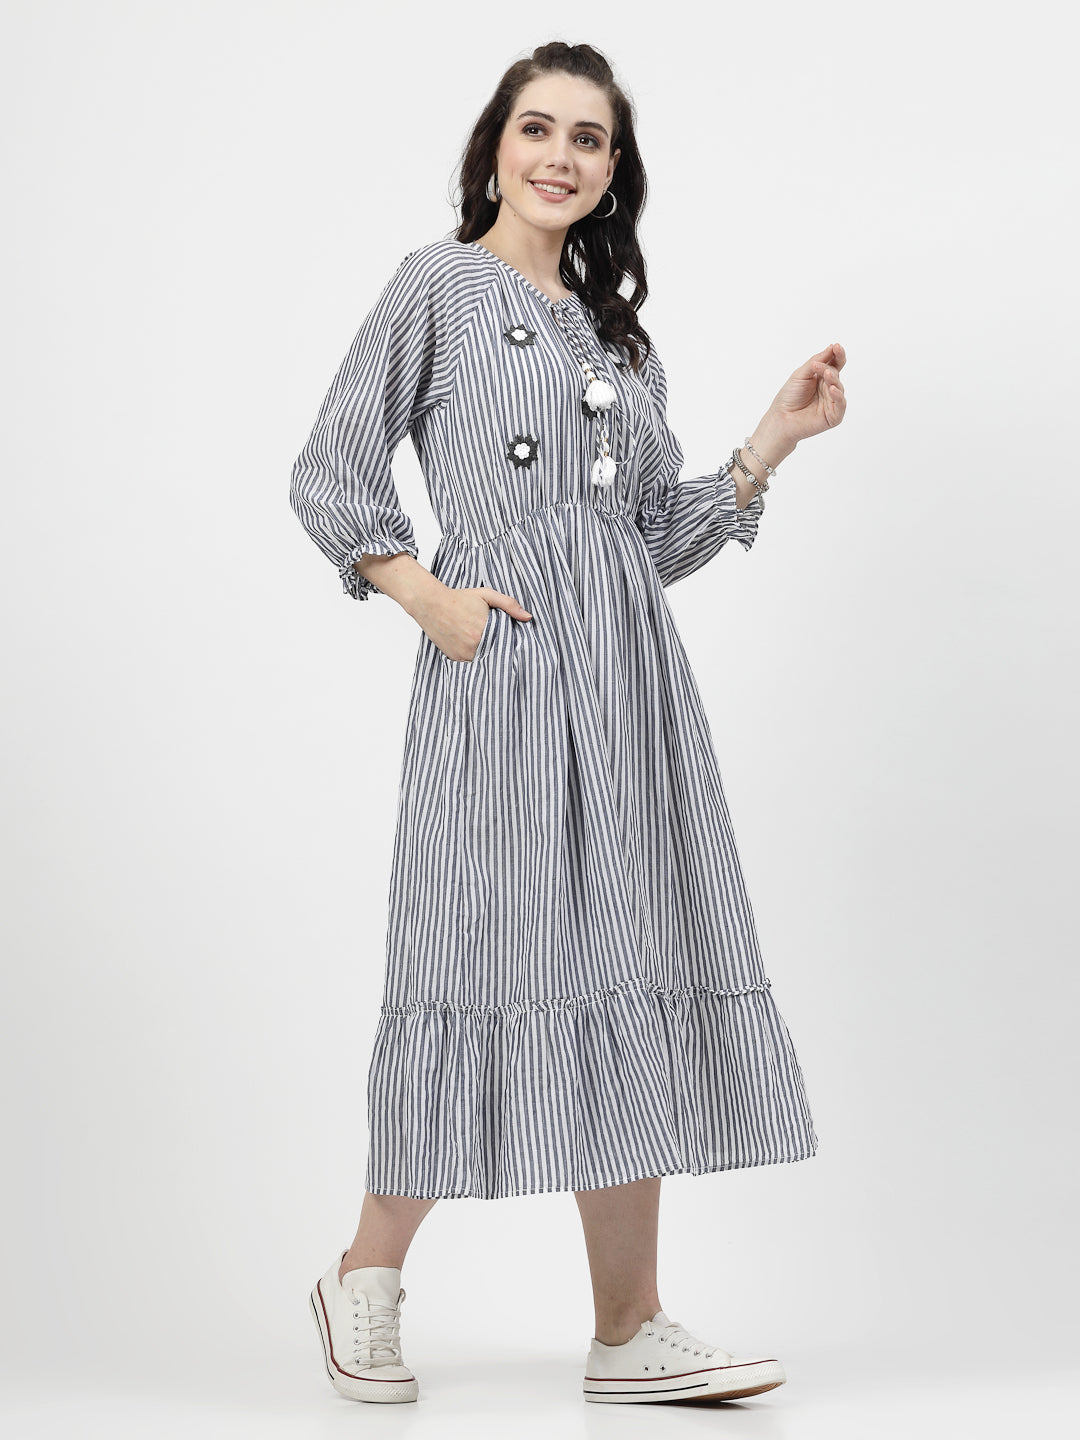 Terquois Yarn Dyed Stripes Gray Dress Dresses Terquois Klothing   